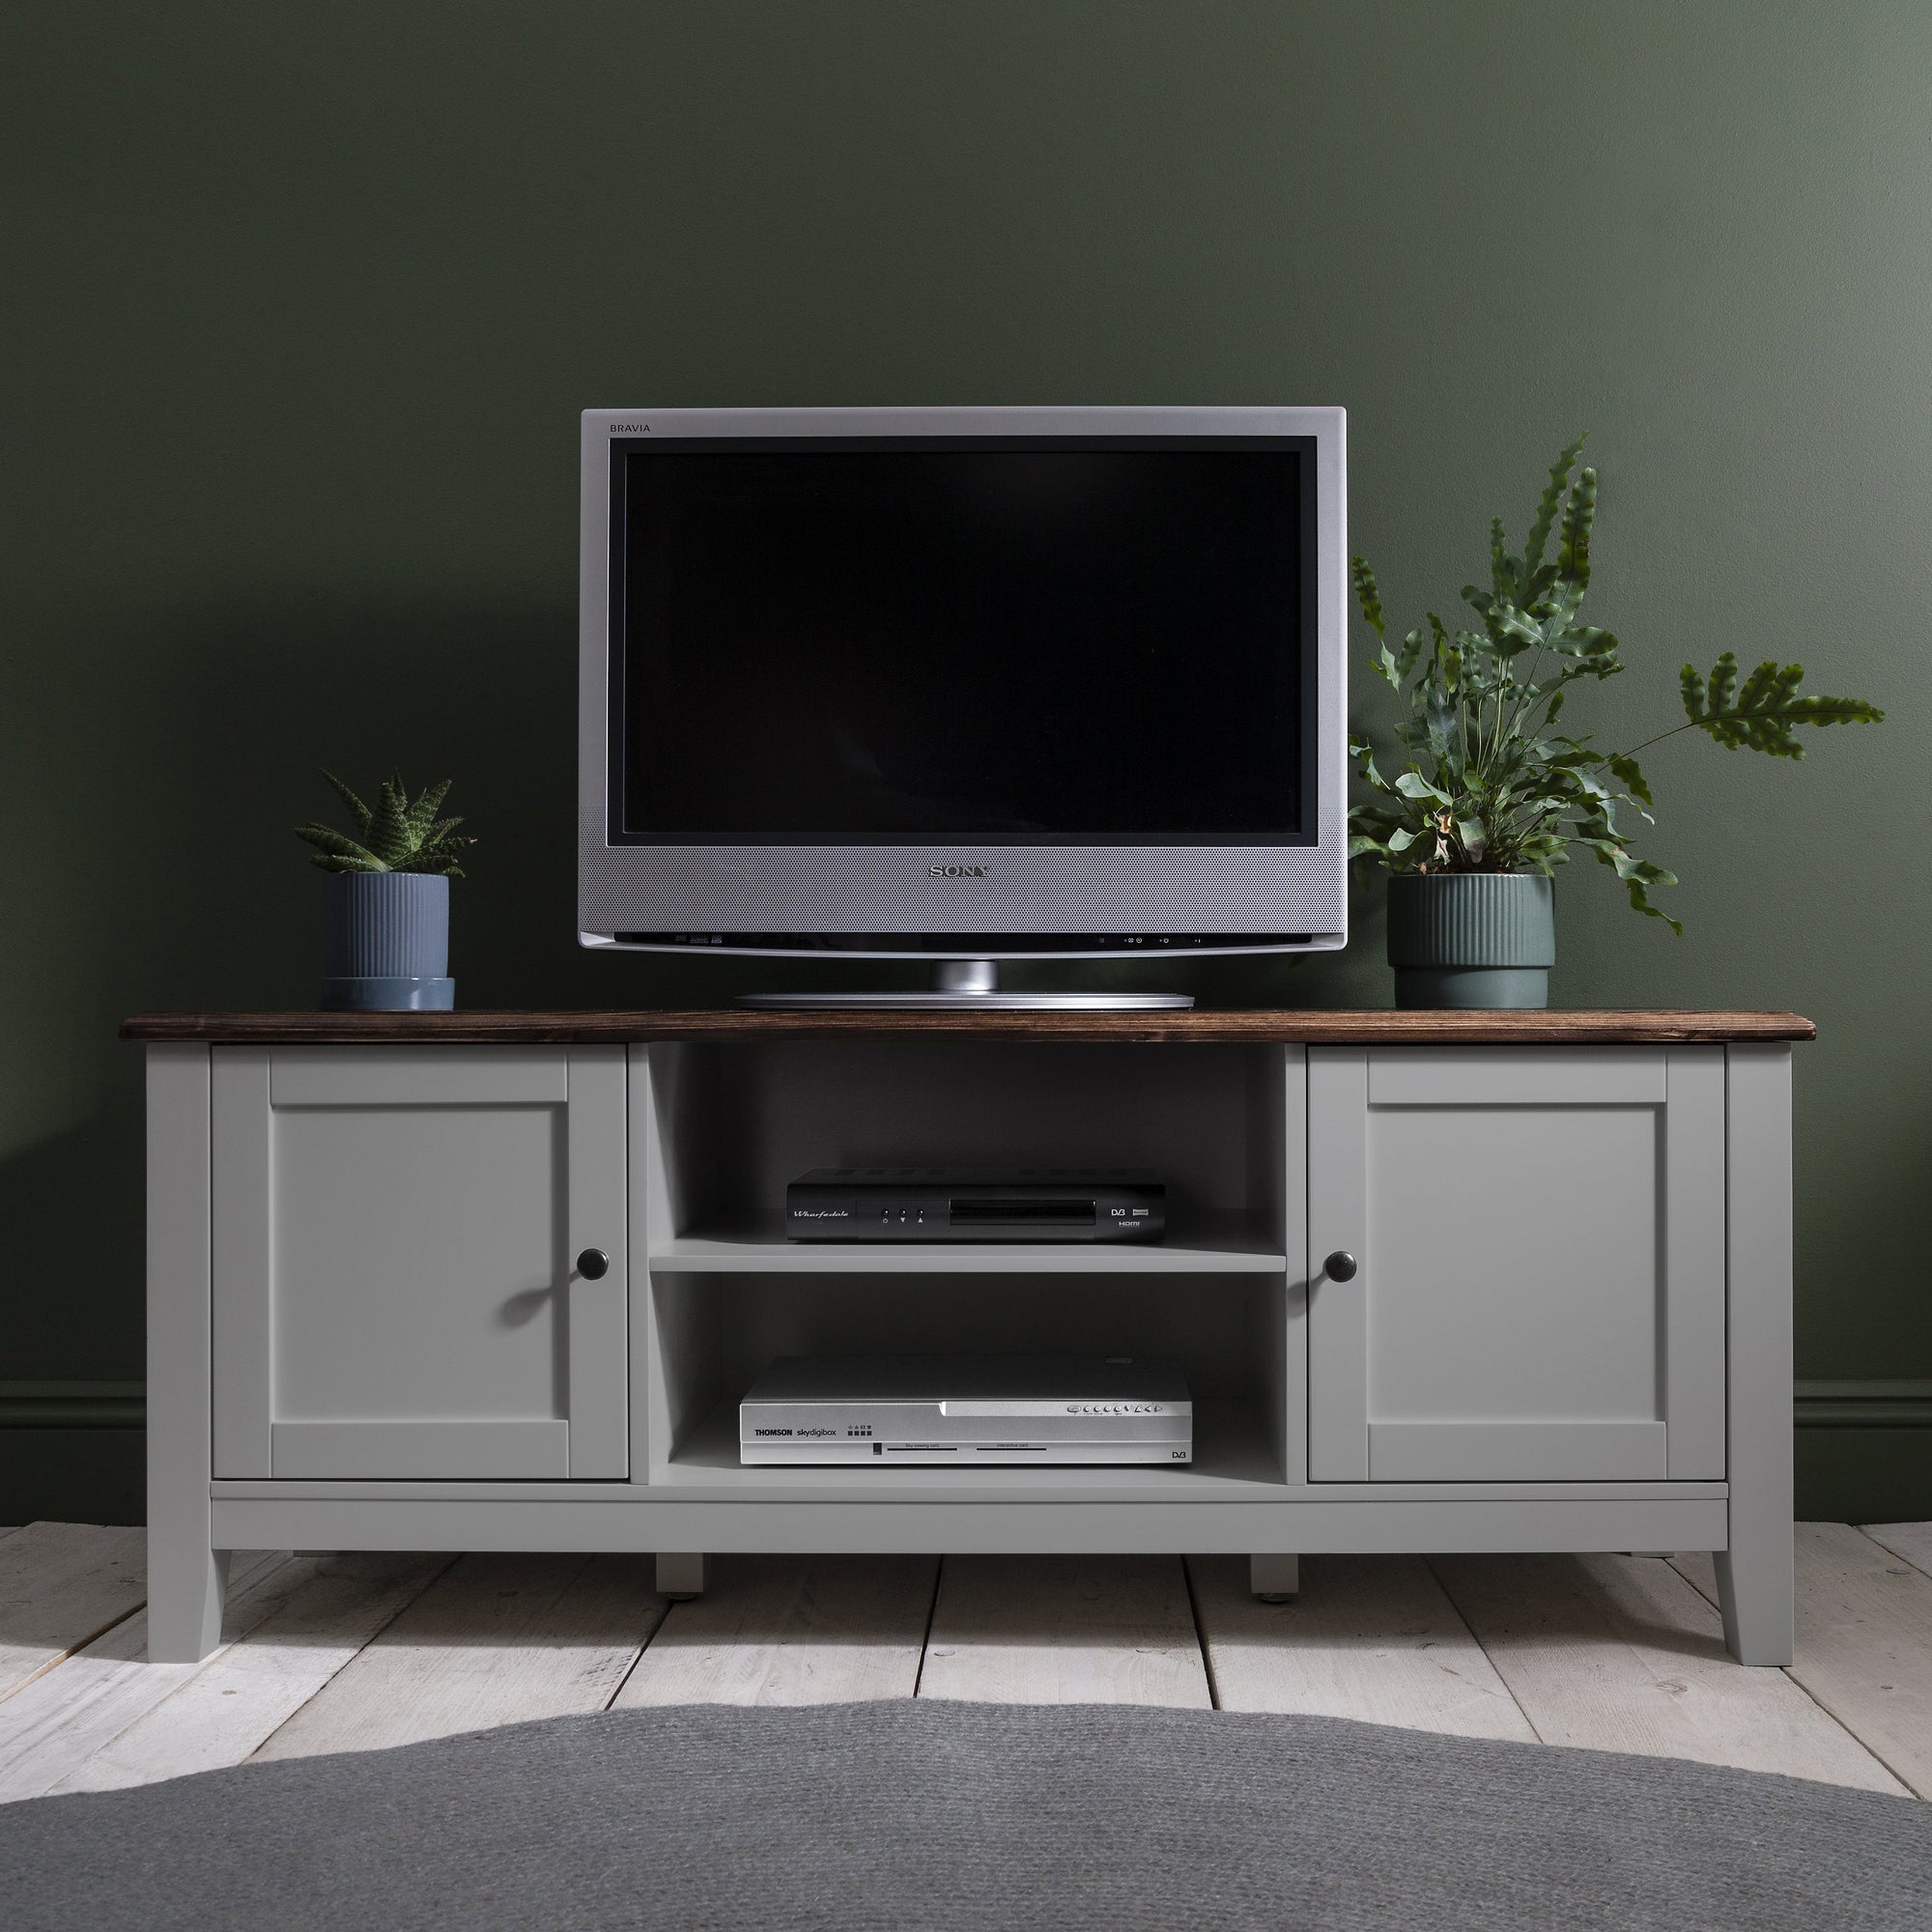 TV Units and Cabinet - Laura James Ireland